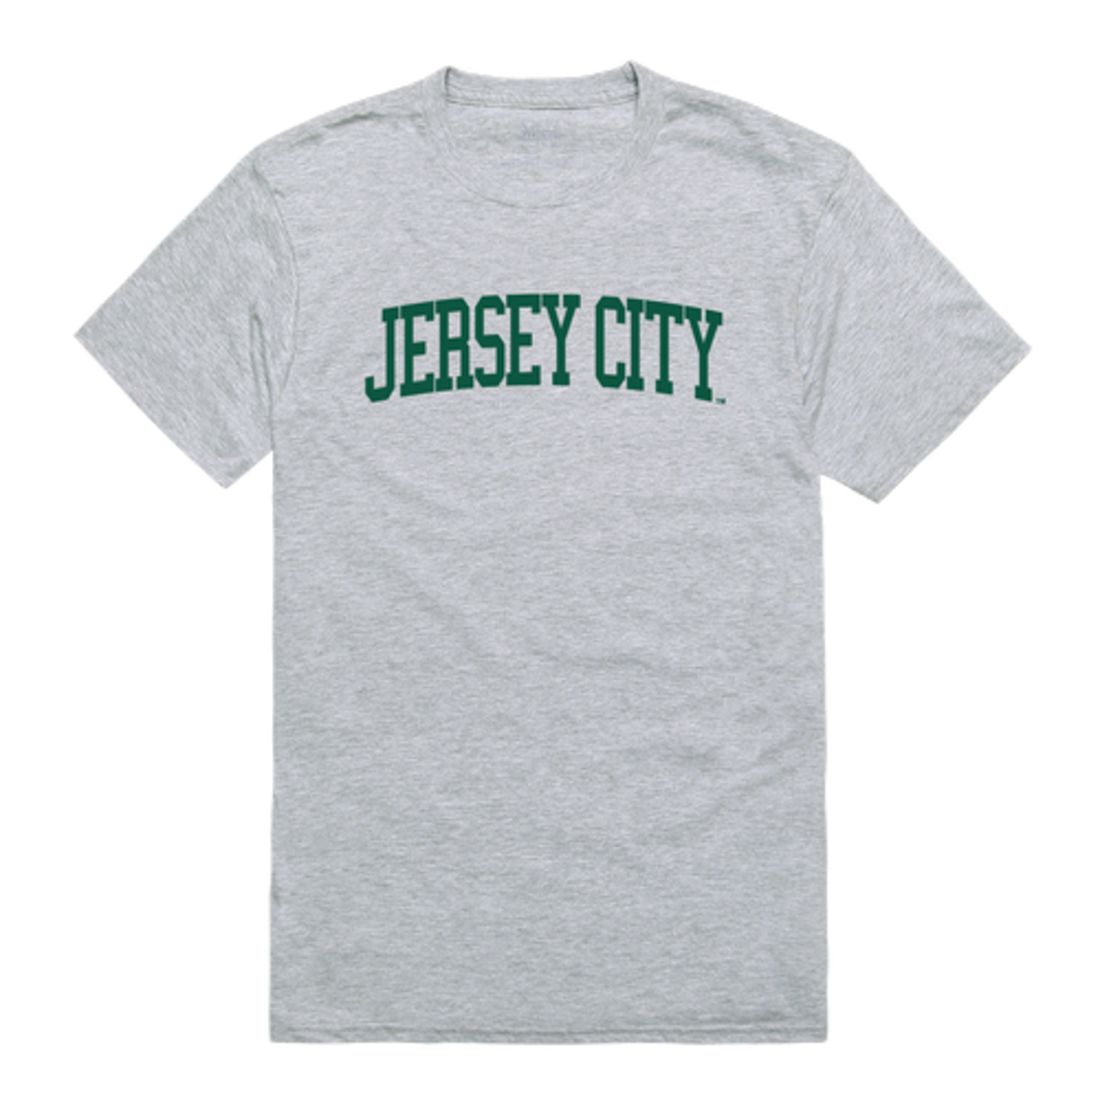 New Jersey City University Knights Game Day T-Shirt Tee